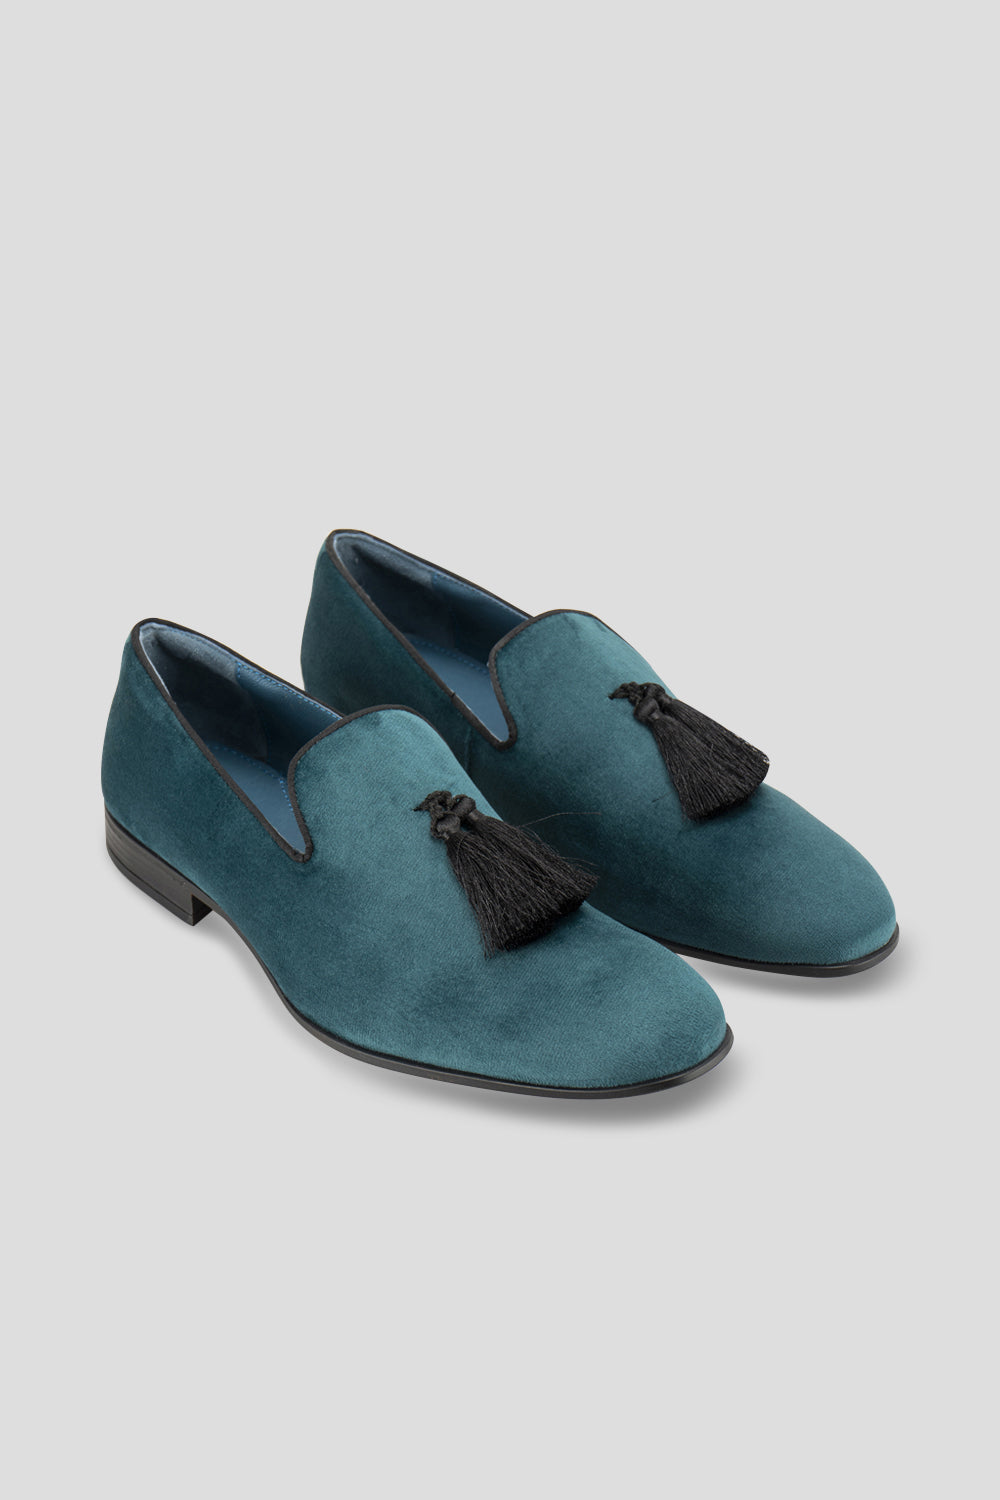 Jacob Green velvet party loafers smoking slippers with black tassel